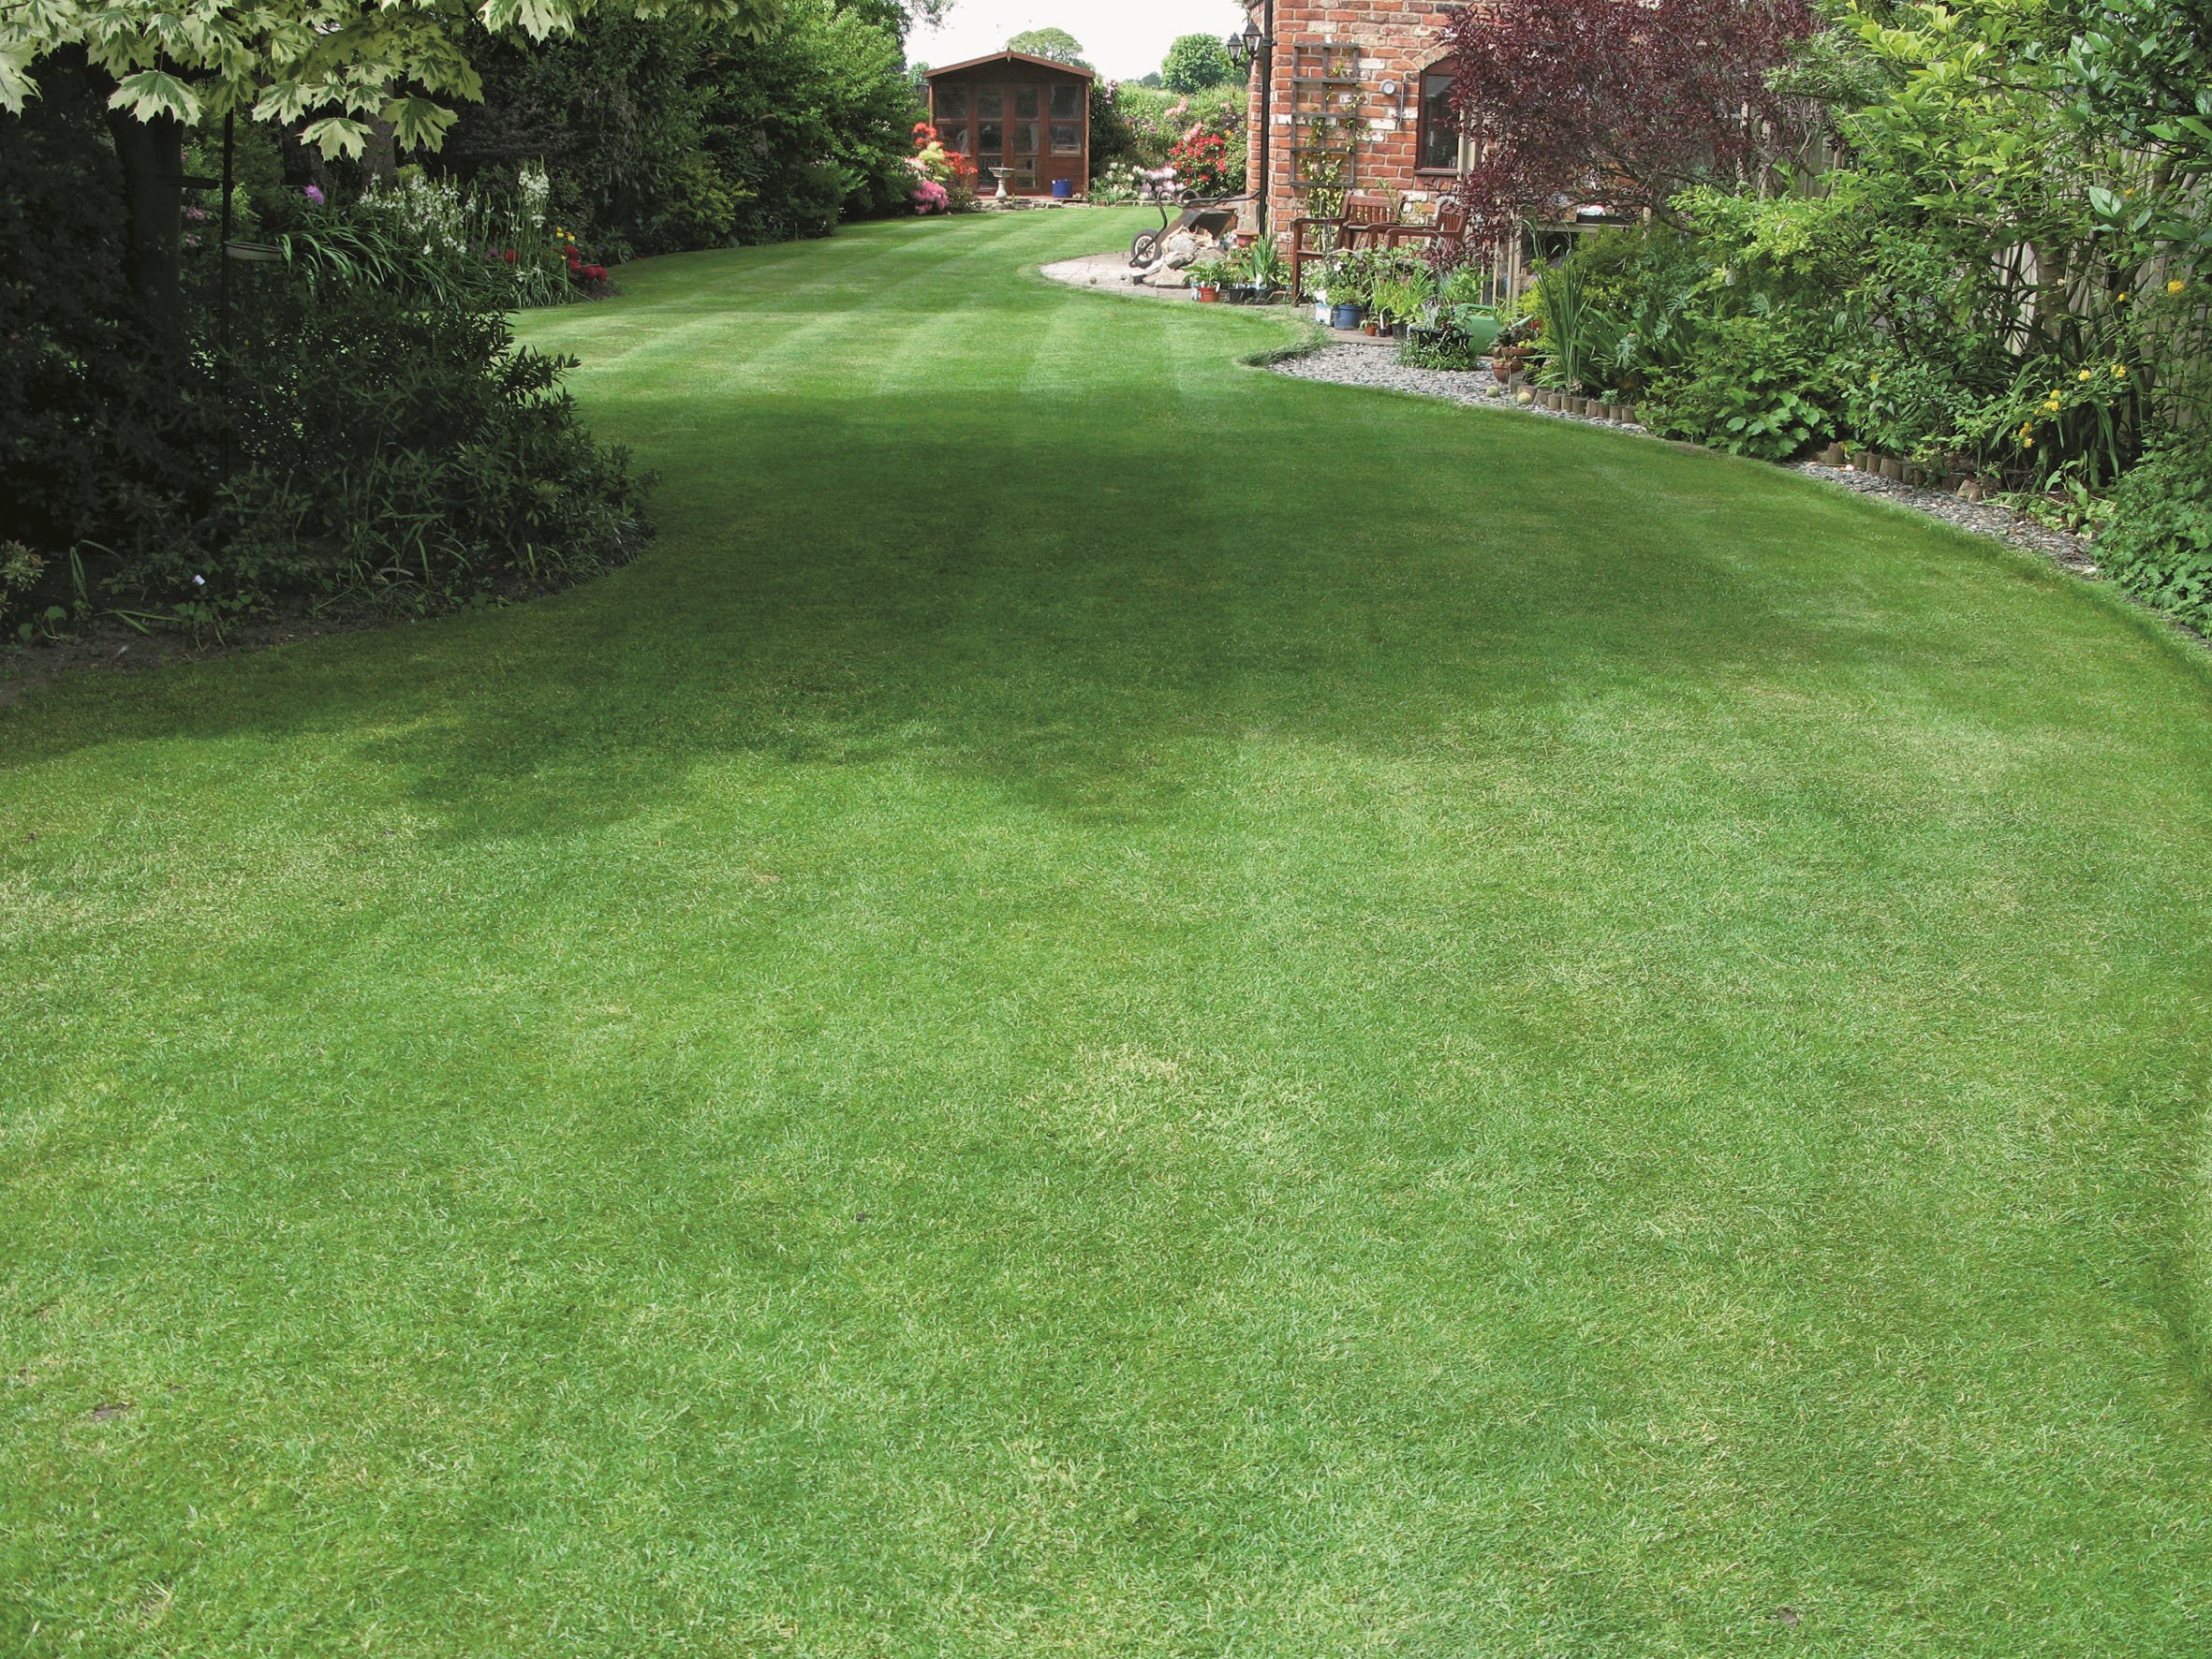 A perfectly manicured level lawn